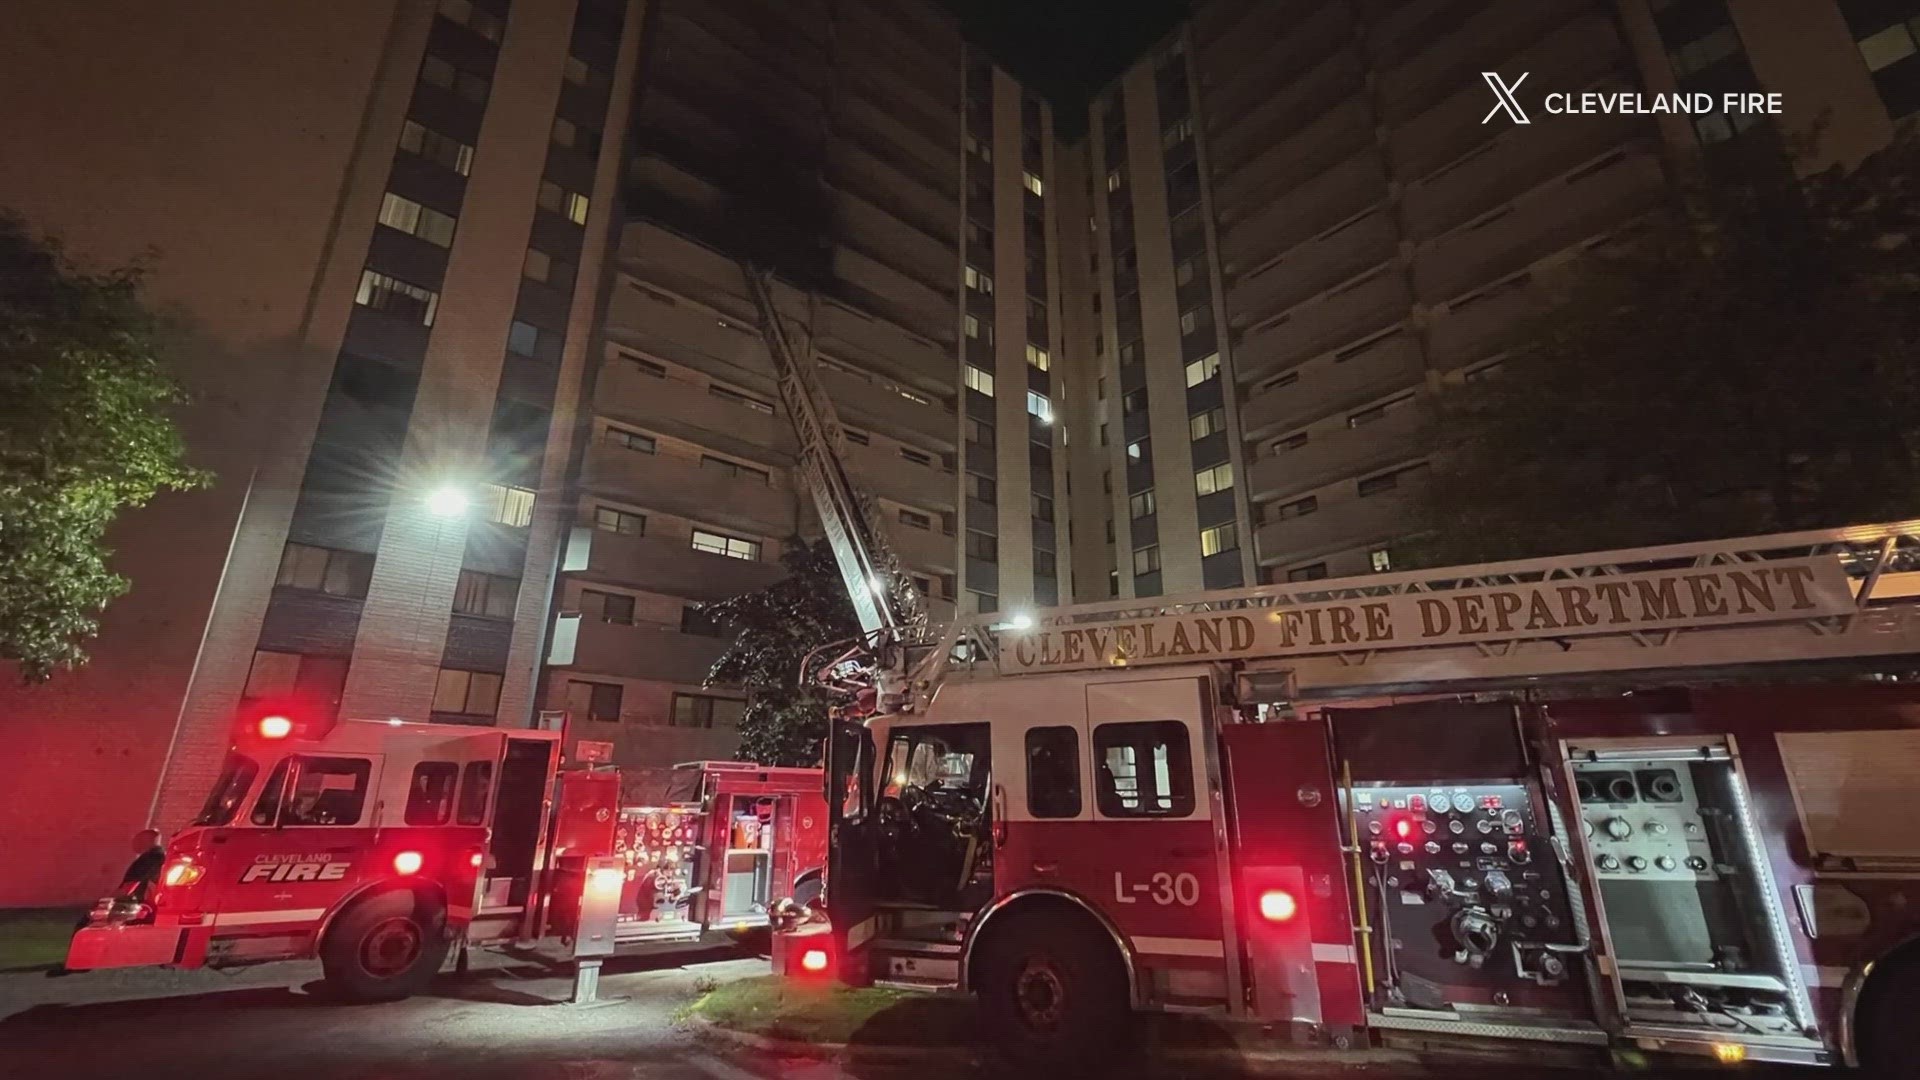 Cleveland fire officials say all residents are safe after a two-alarm fire happened at an apartment building overnight on East 156th Street.